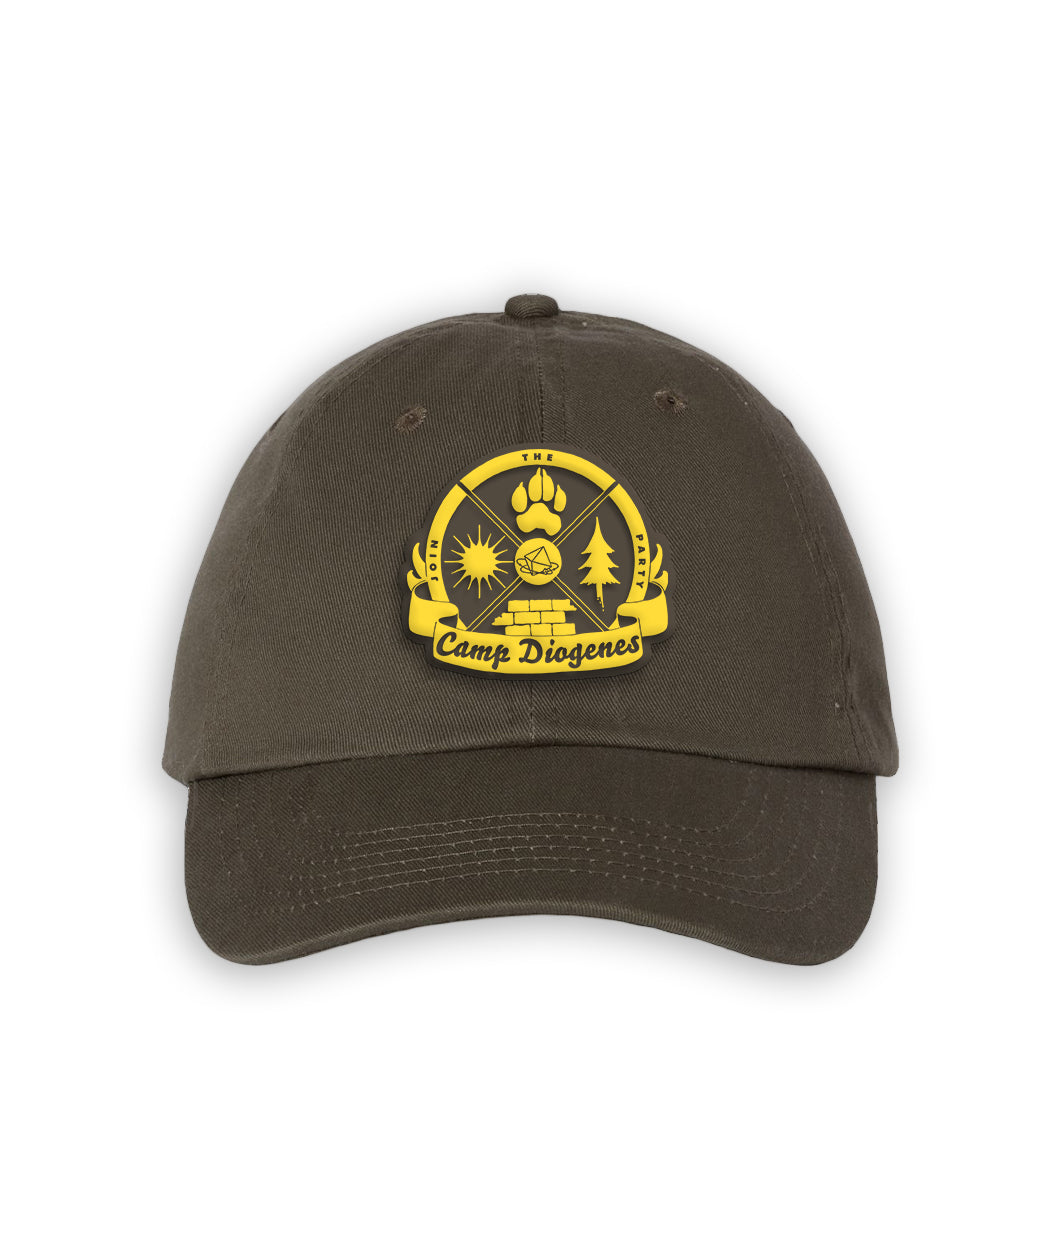 Dark green dad hat with a yellow crest patch that reads 